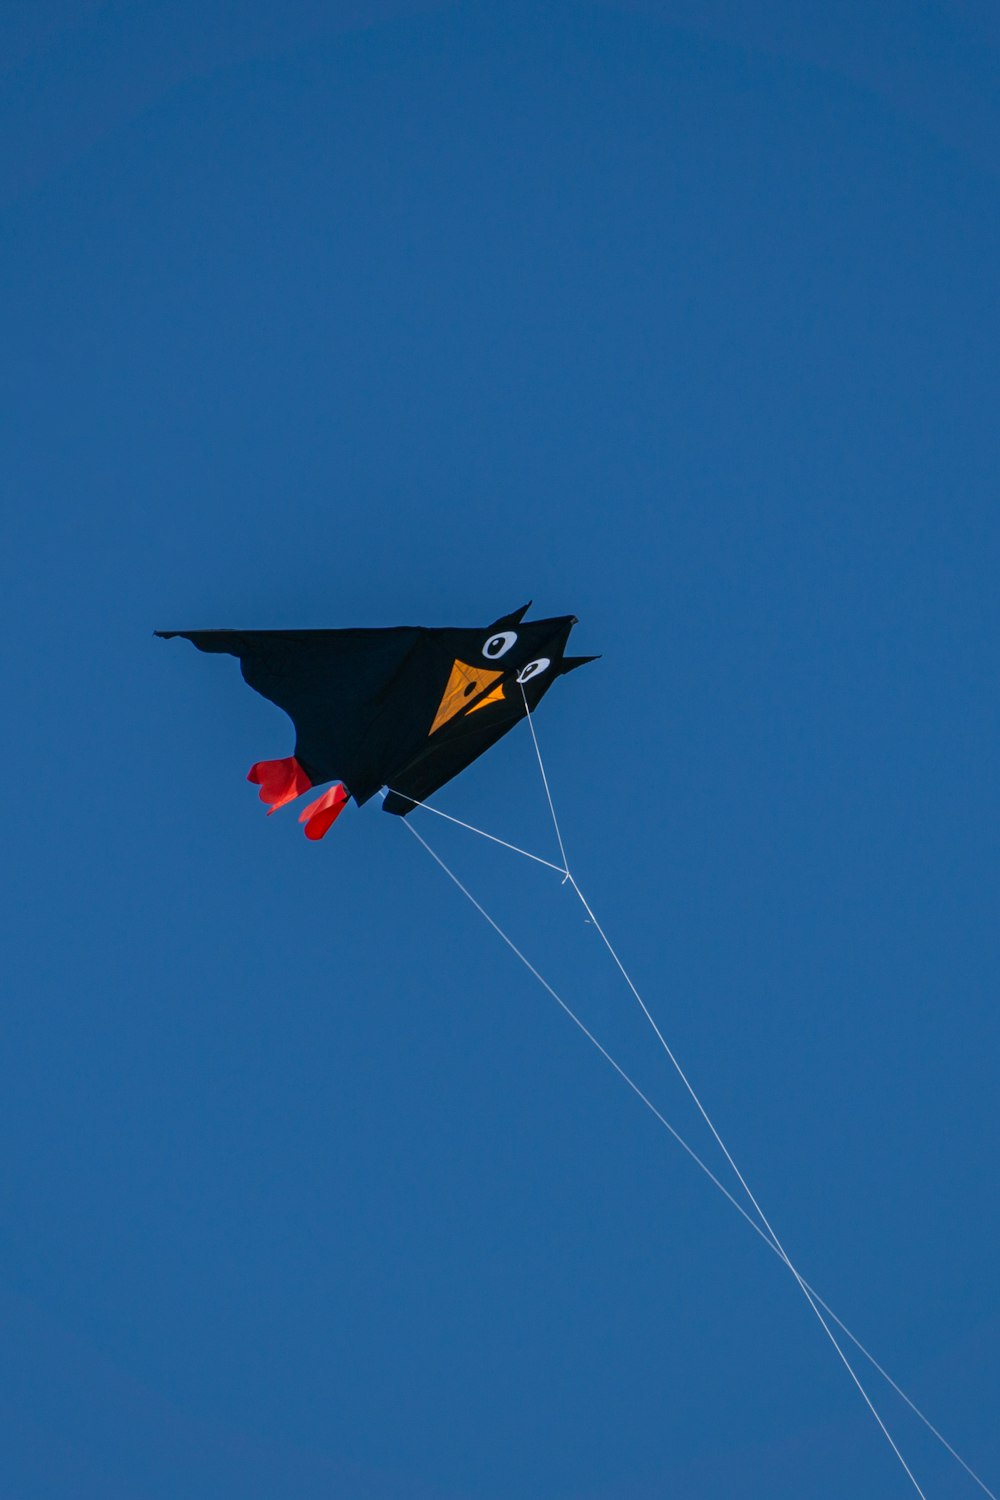 a black and yellow kite flying in a blue sky